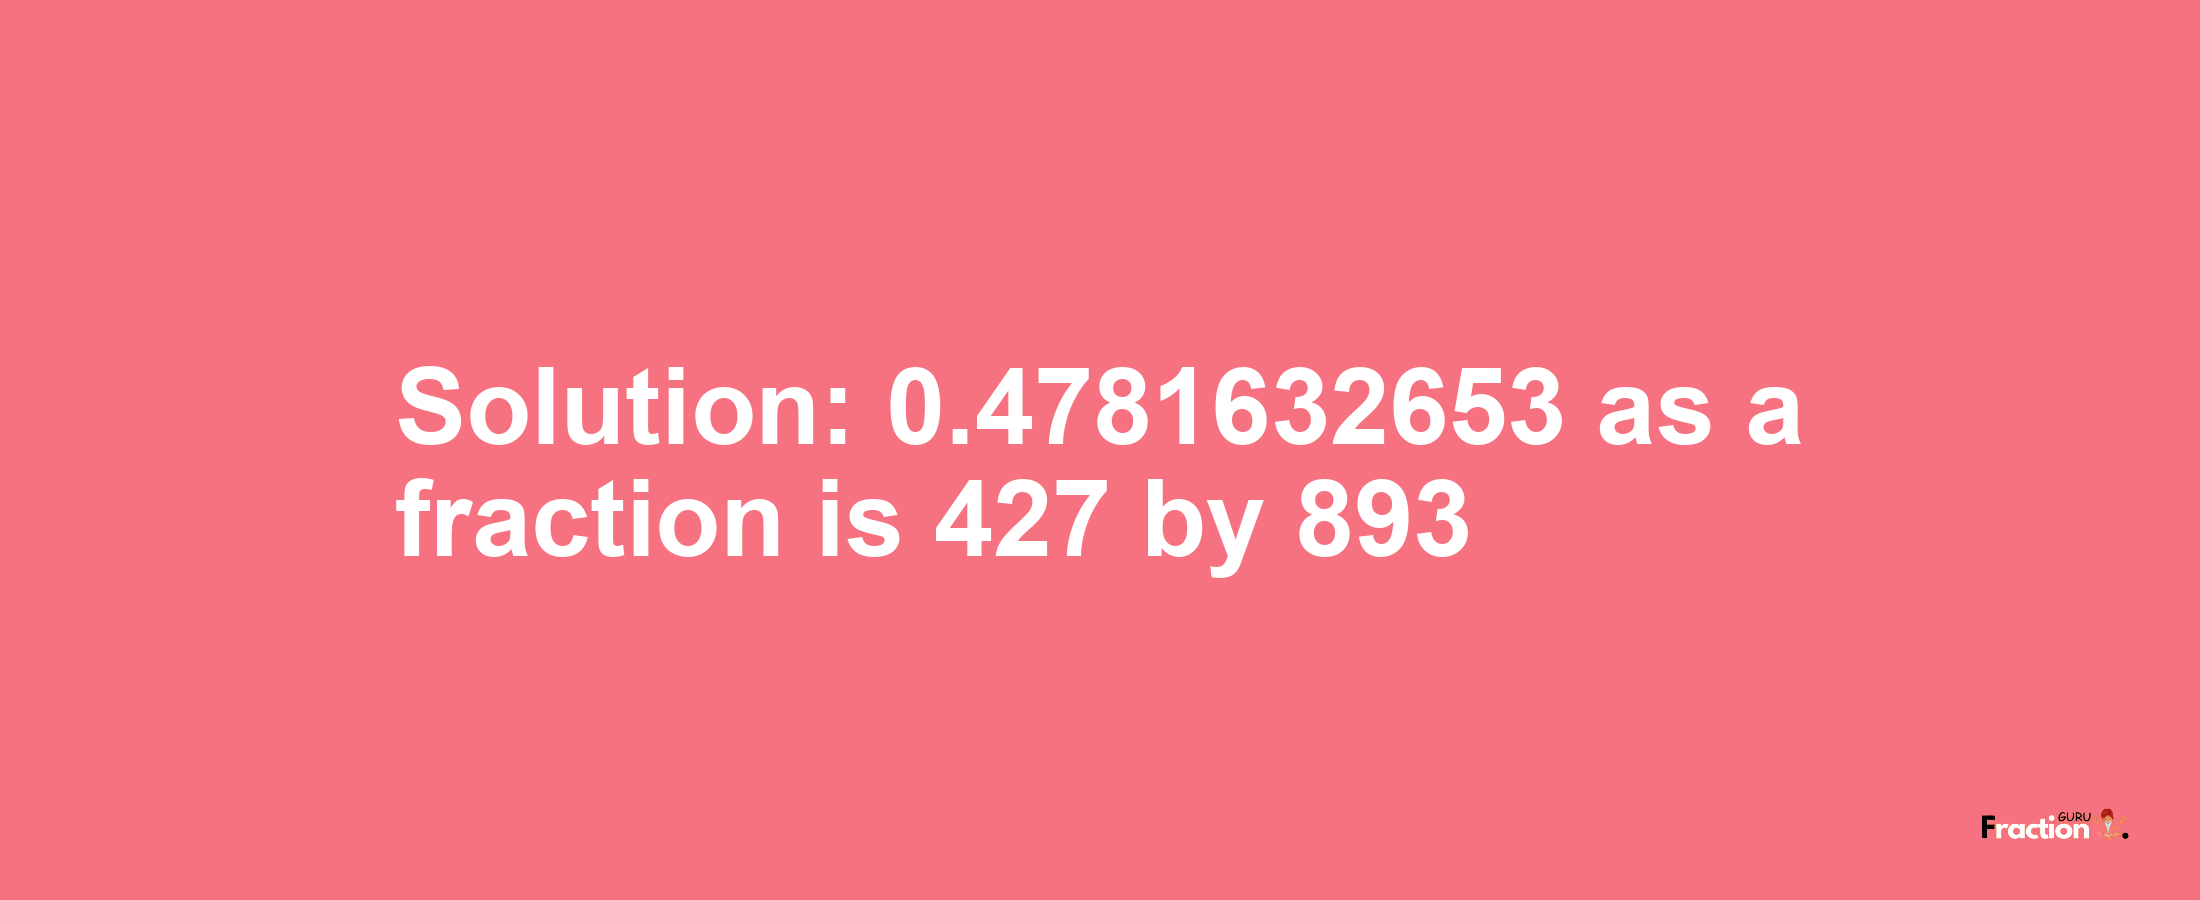 Solution:0.4781632653 as a fraction is 427/893